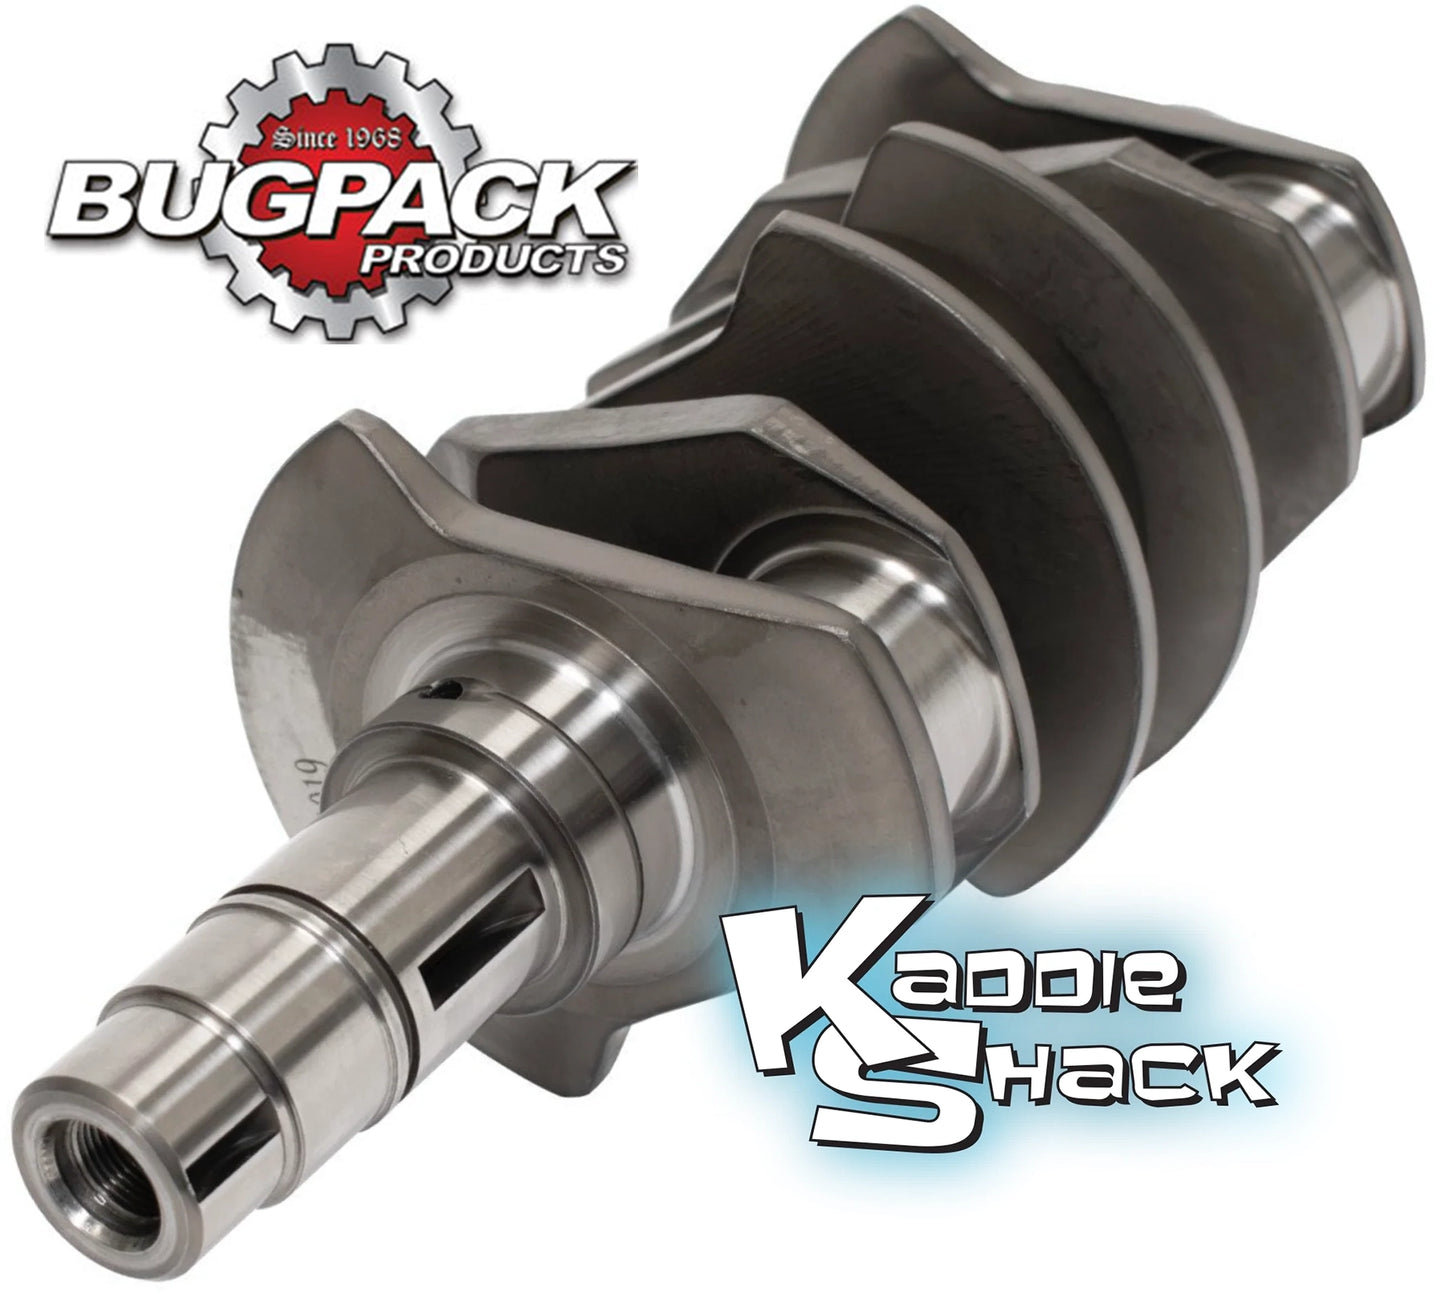 Bugpack 86mm Forged 4340 Chromoly Counterweighted Crankshaft, Chevy Journals